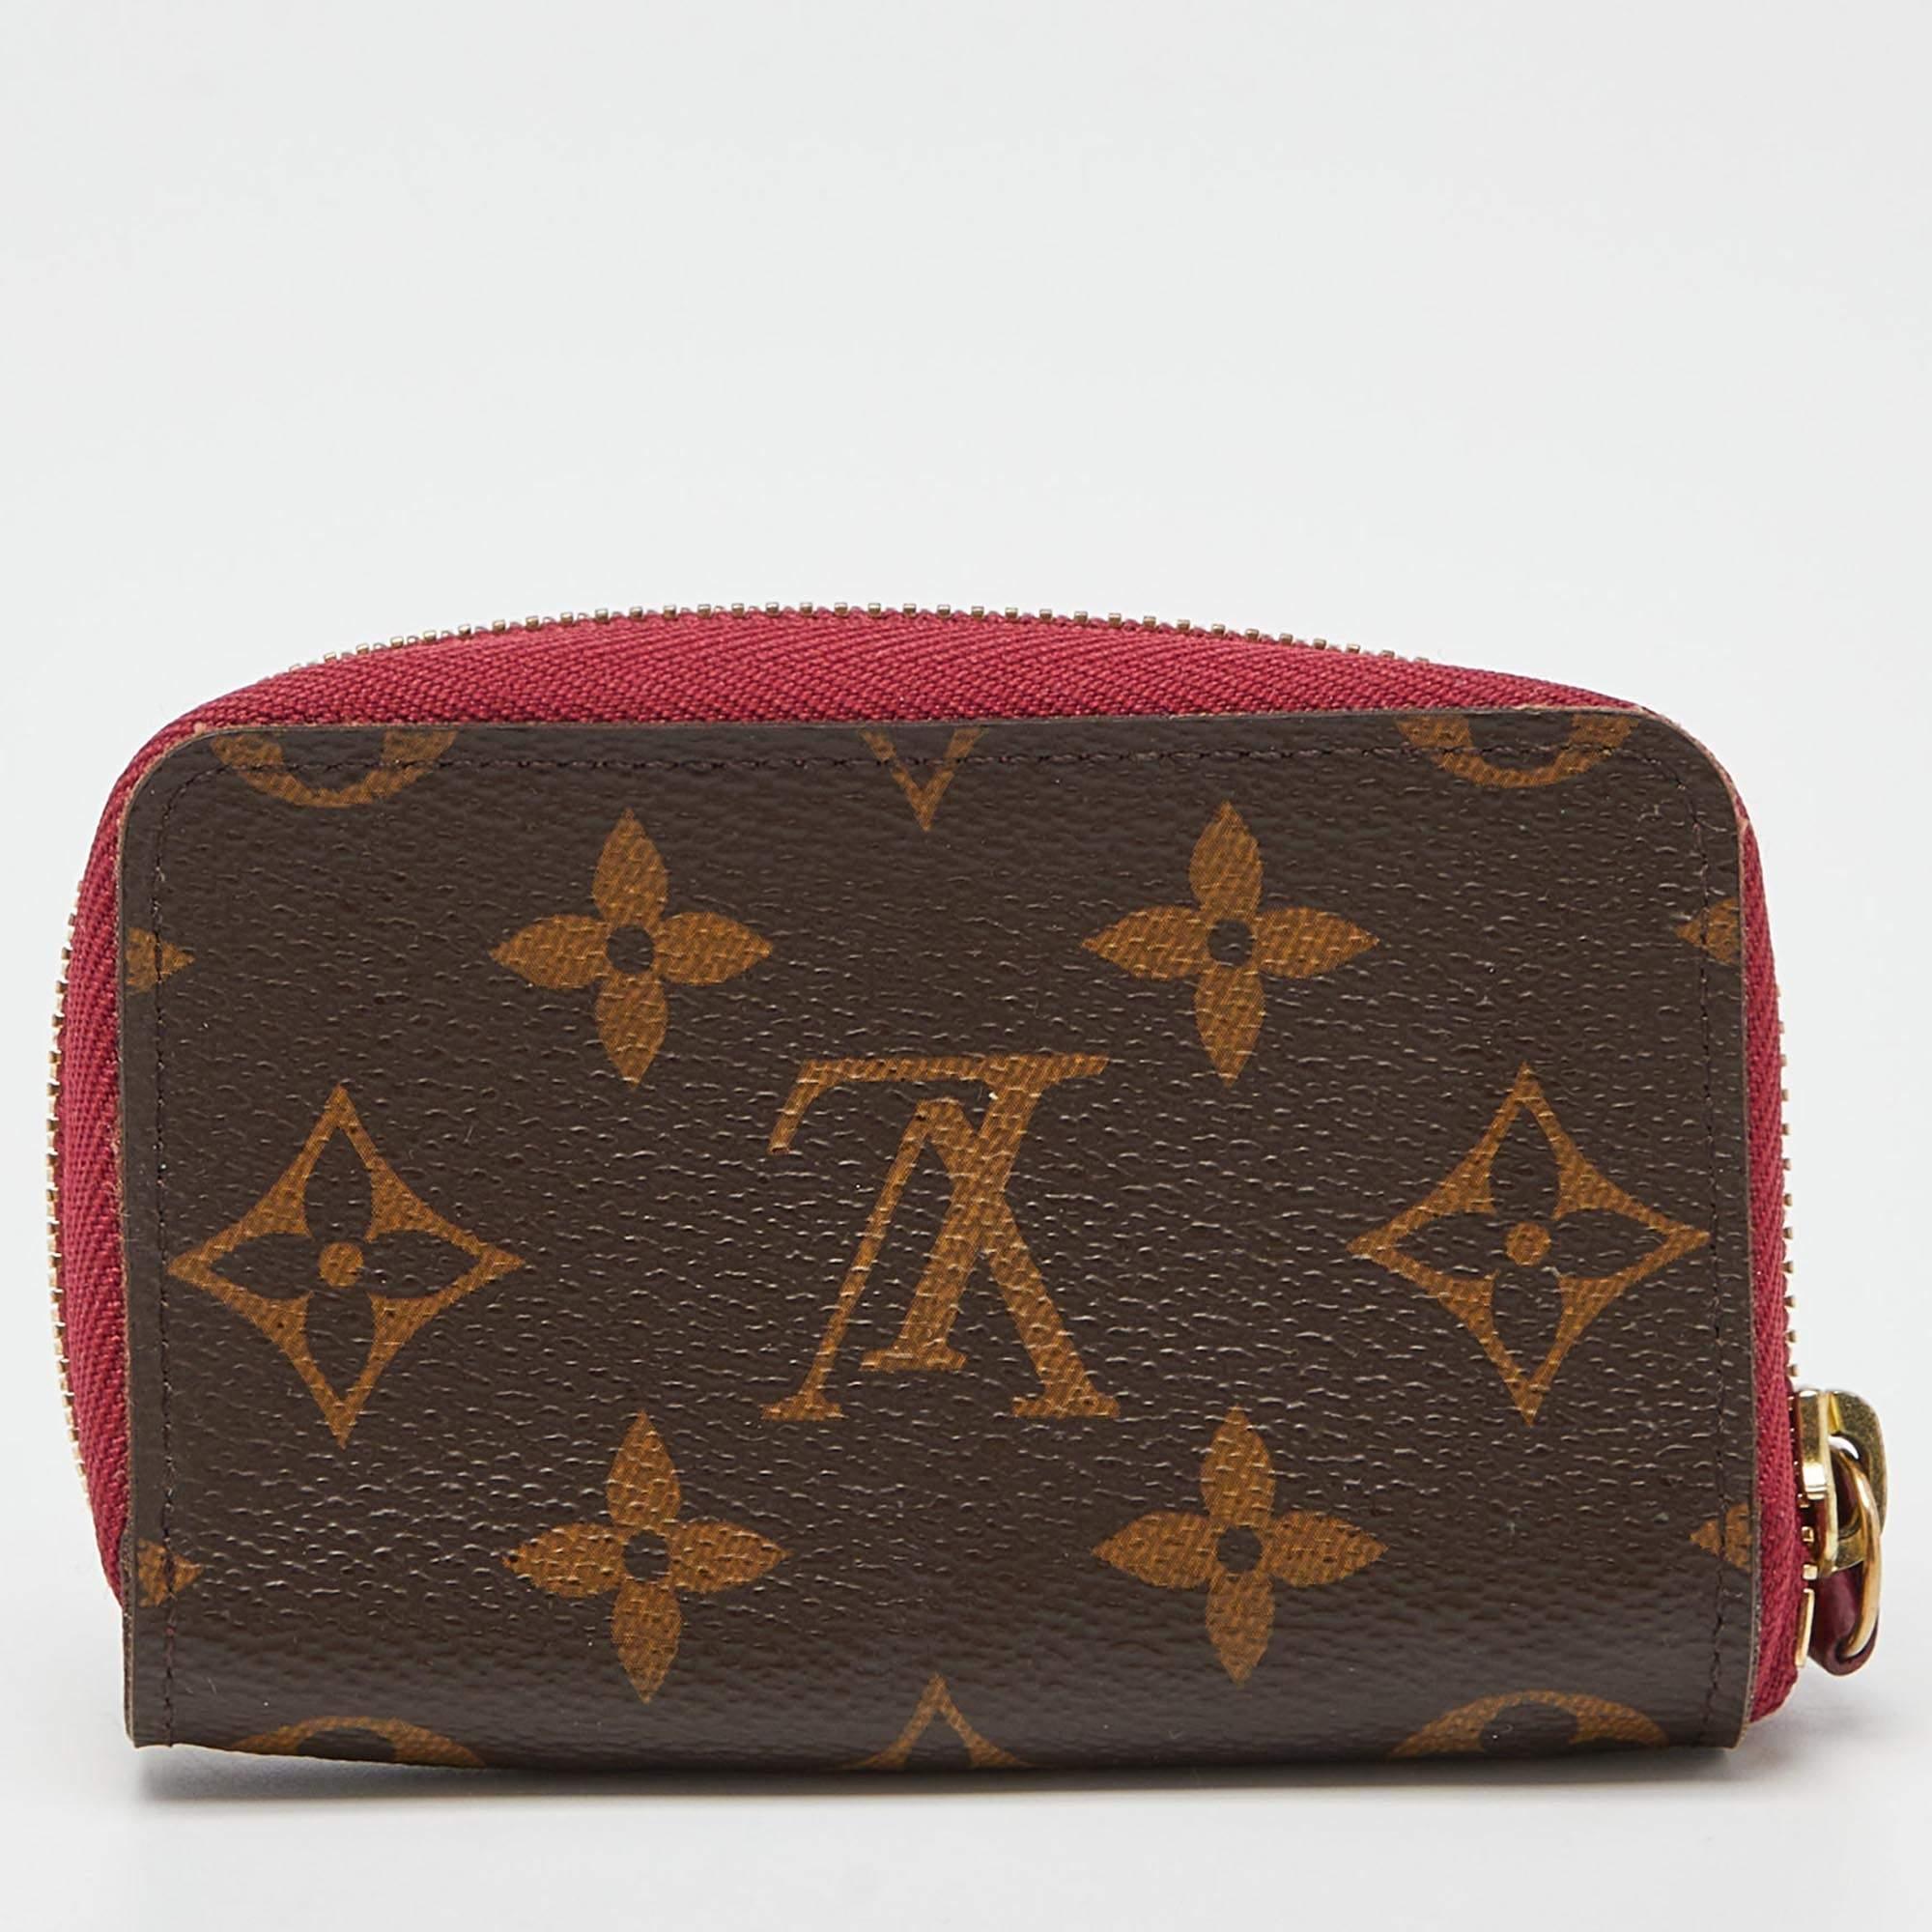 This Louis Vuitton piece is carefully crafted to offer you a luxurious accessory you will cherish. It is marked by high quality and enduring appeal. Invest in it today!

